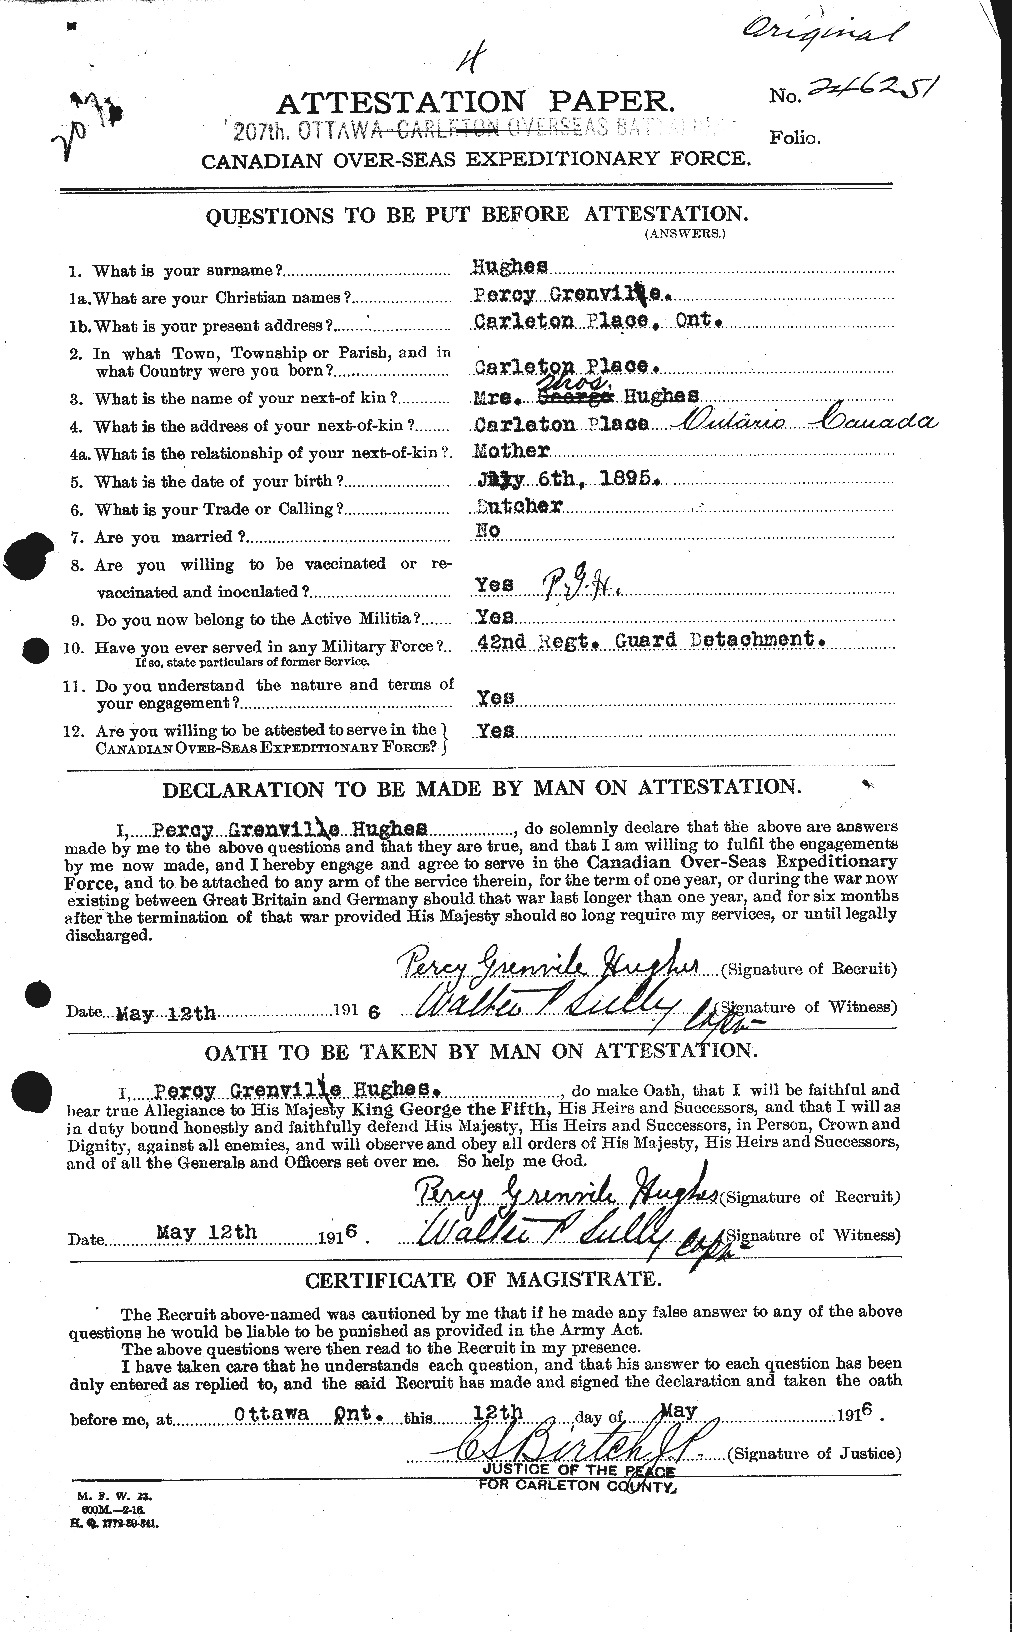 Personnel Records of the First World War - CEF 404159a